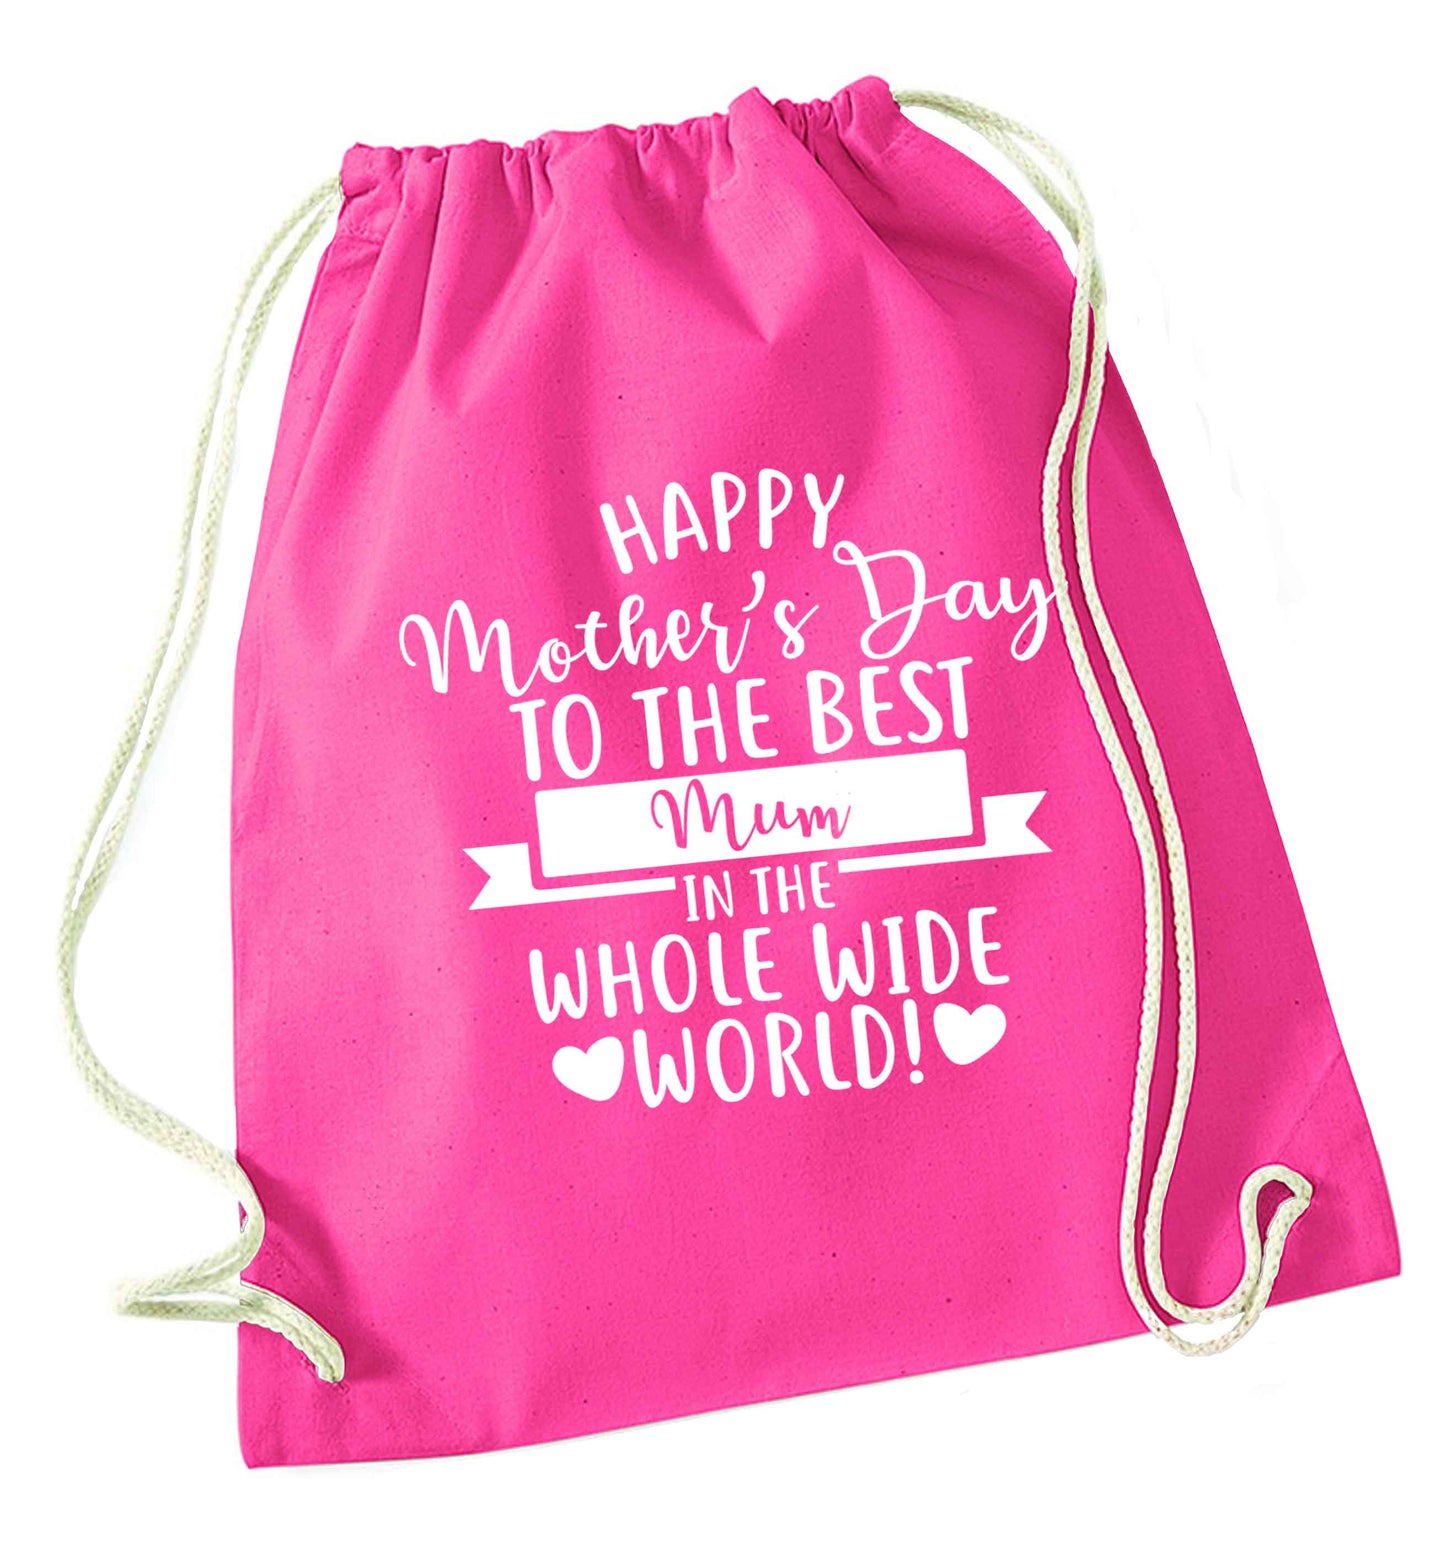 Happy mother's day to the best mum in the world pink drawstring bag